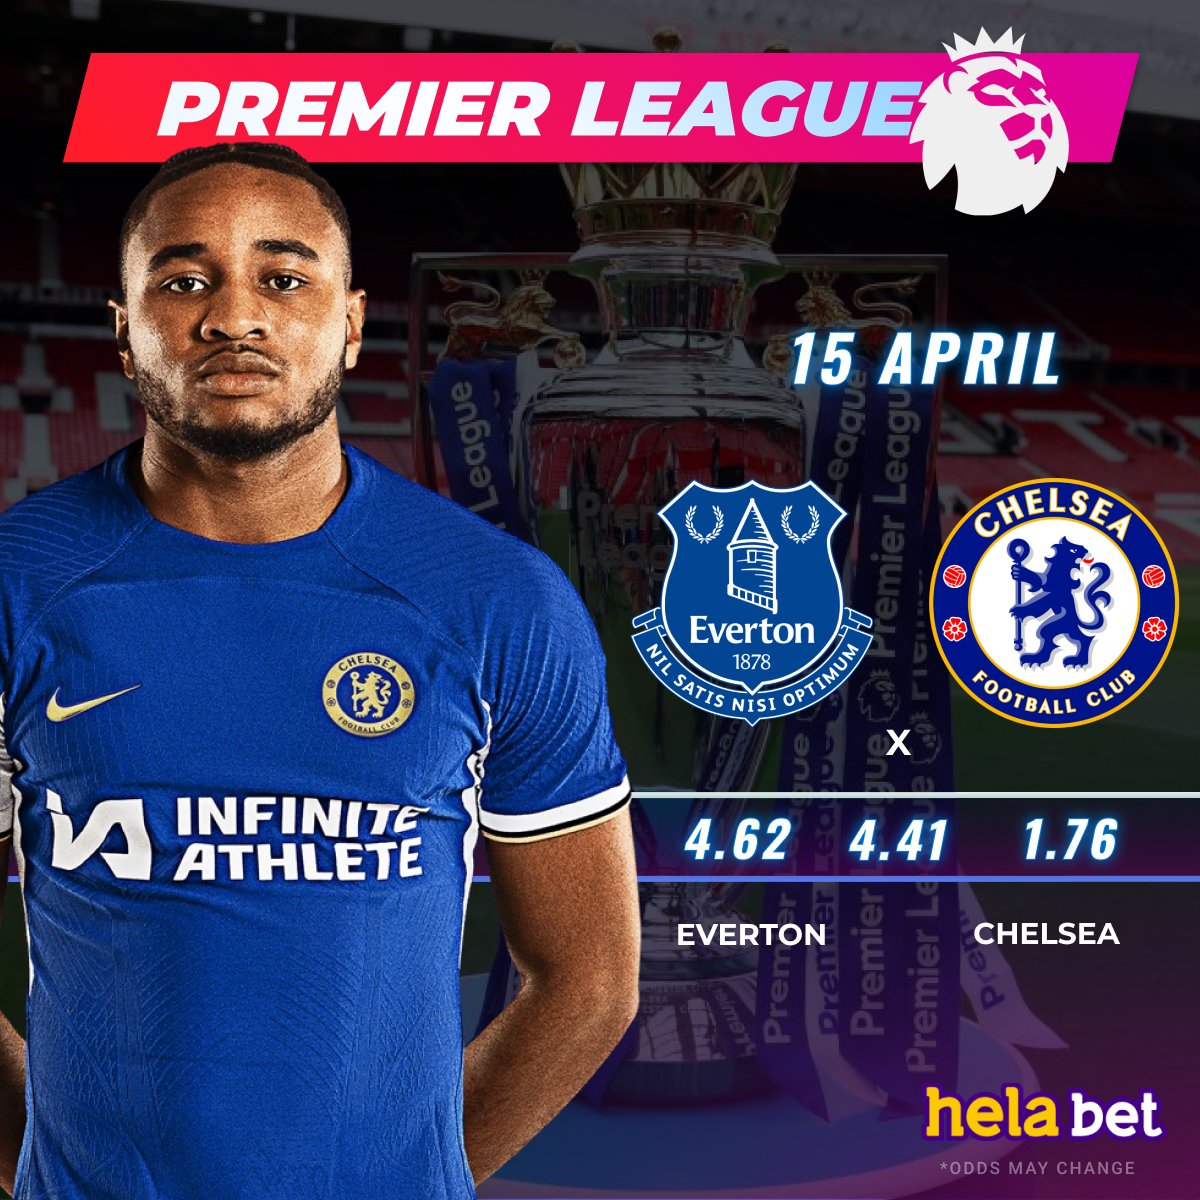 🔥 Tonight, on the 33rd round of the 🇬🇧 Premier League 🦁, #Chelsea will play at their home stadium with #Everton 👉 All forecasts for the game in #Helabet 👉 cutt.ly/UwY8h1uG #epl #premierleague #football